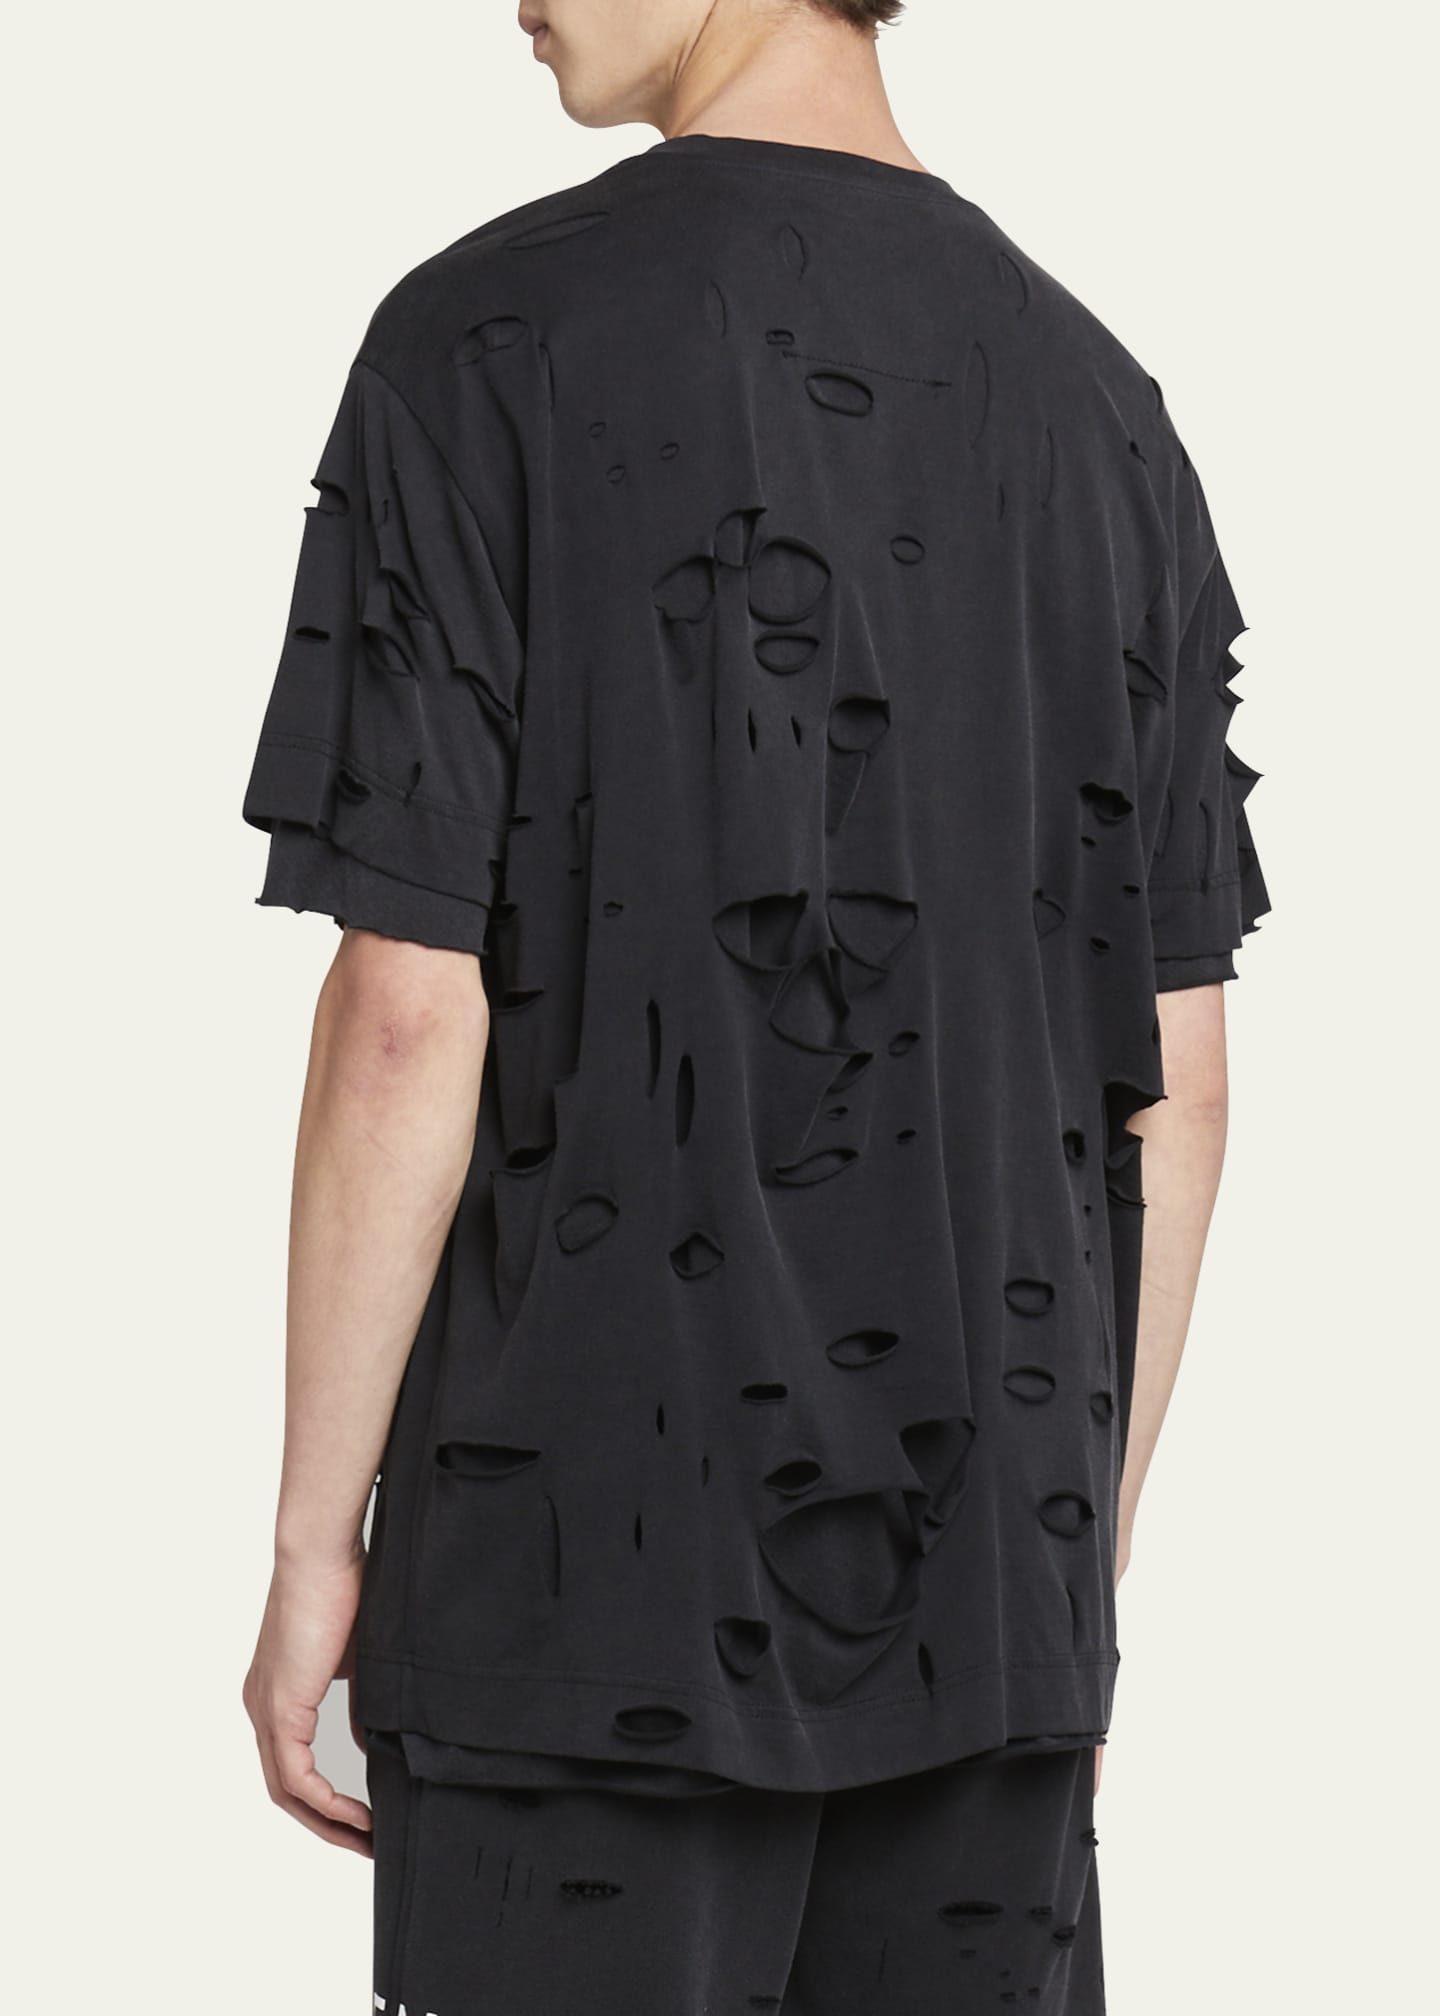 Givenchy Men's Destroyed Double-Layer T-Shirt - Bergdorf Goodman